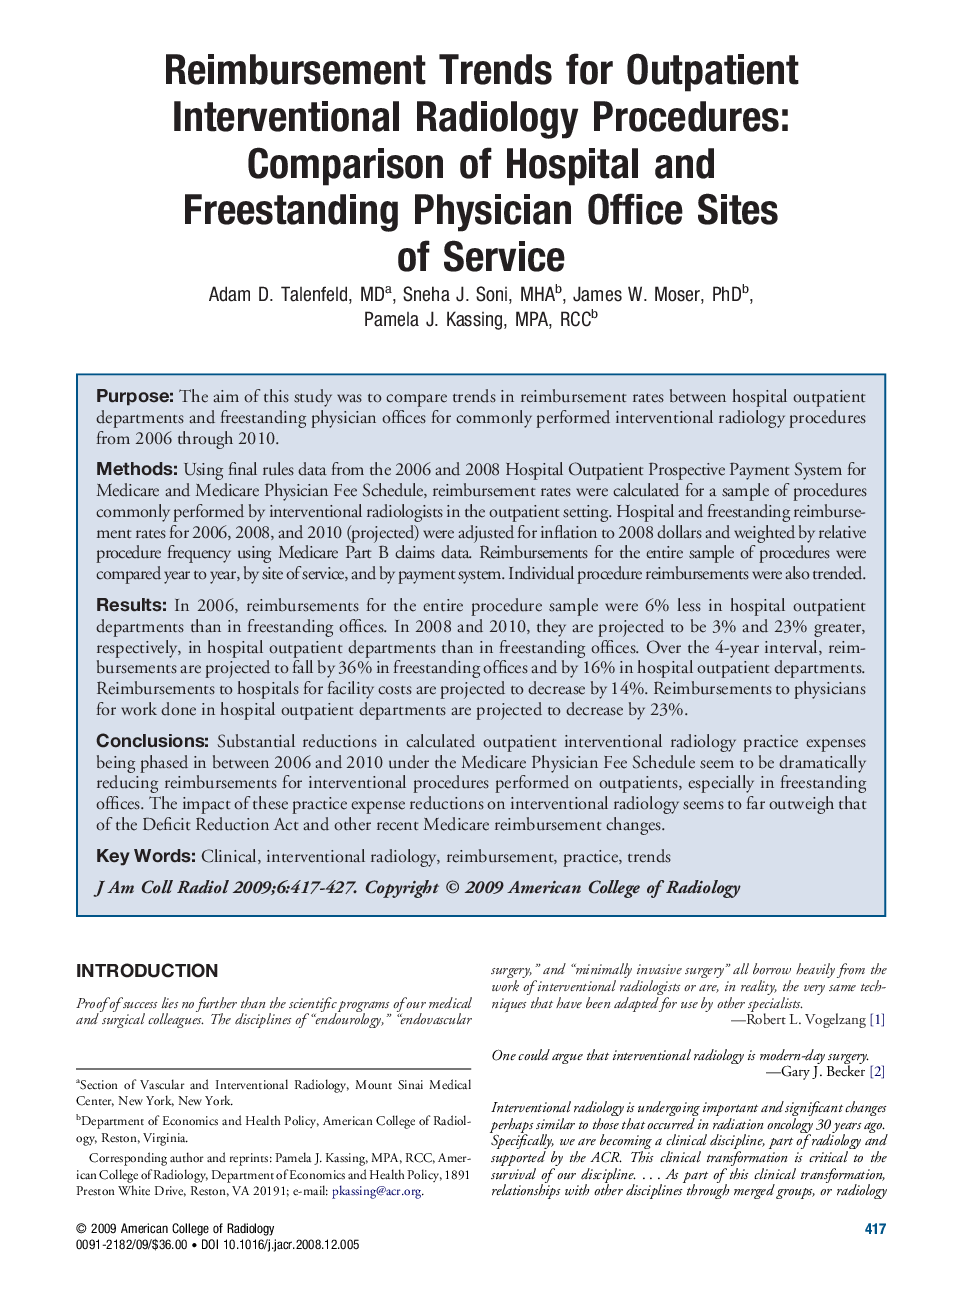 Reimbursement Trends for Outpatient Interventional Radiology Procedures: Comparison of Hospital and Freestanding Physician Office Sites of Service